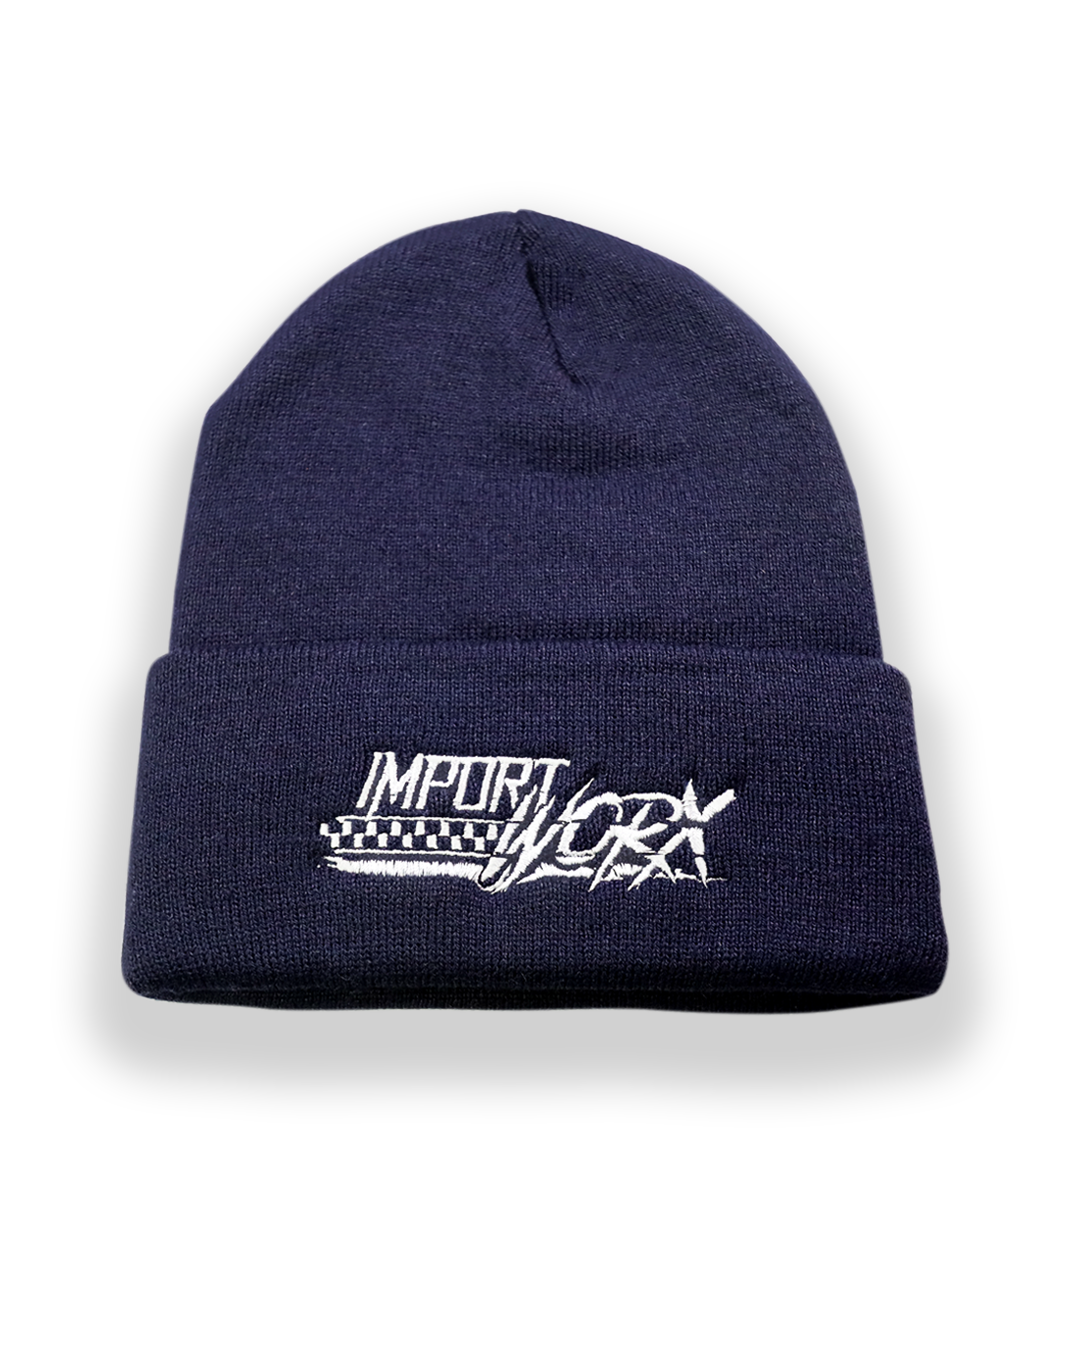 ImportWorx Checkered Embroidered Beanie